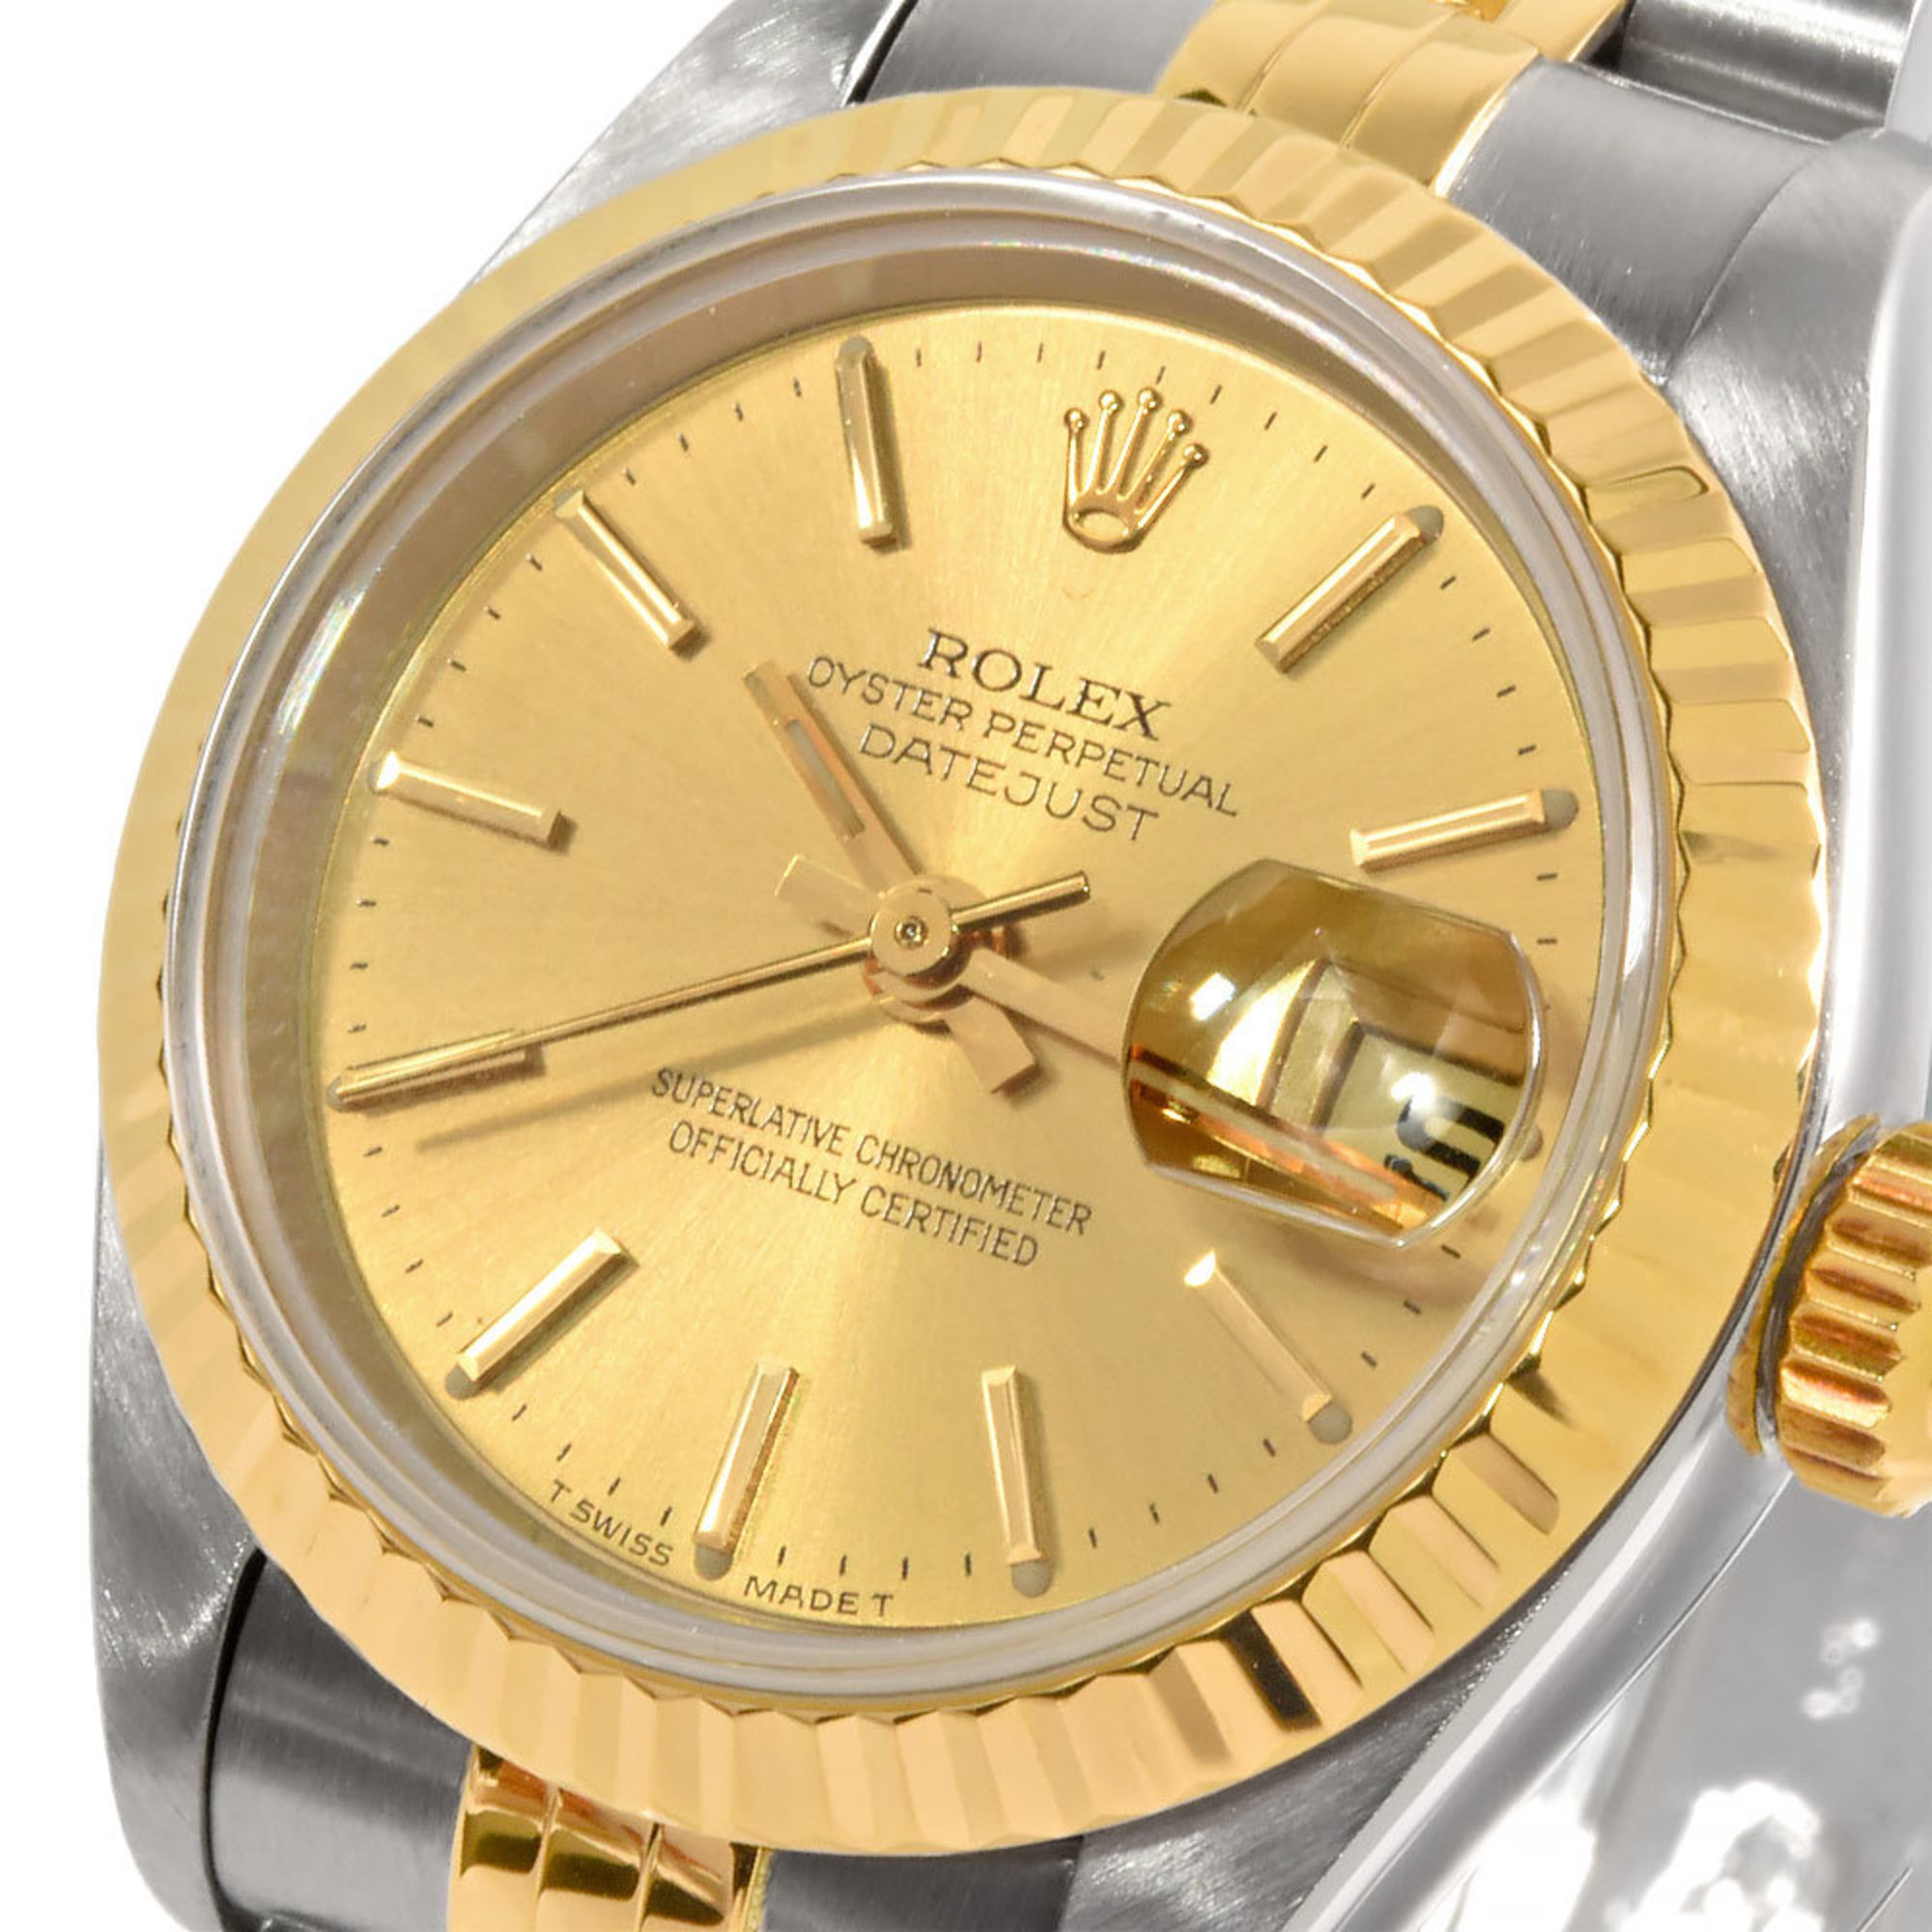 Rolex ROLEX 69173 Datejust W watch automatic winding champagne dial ladies